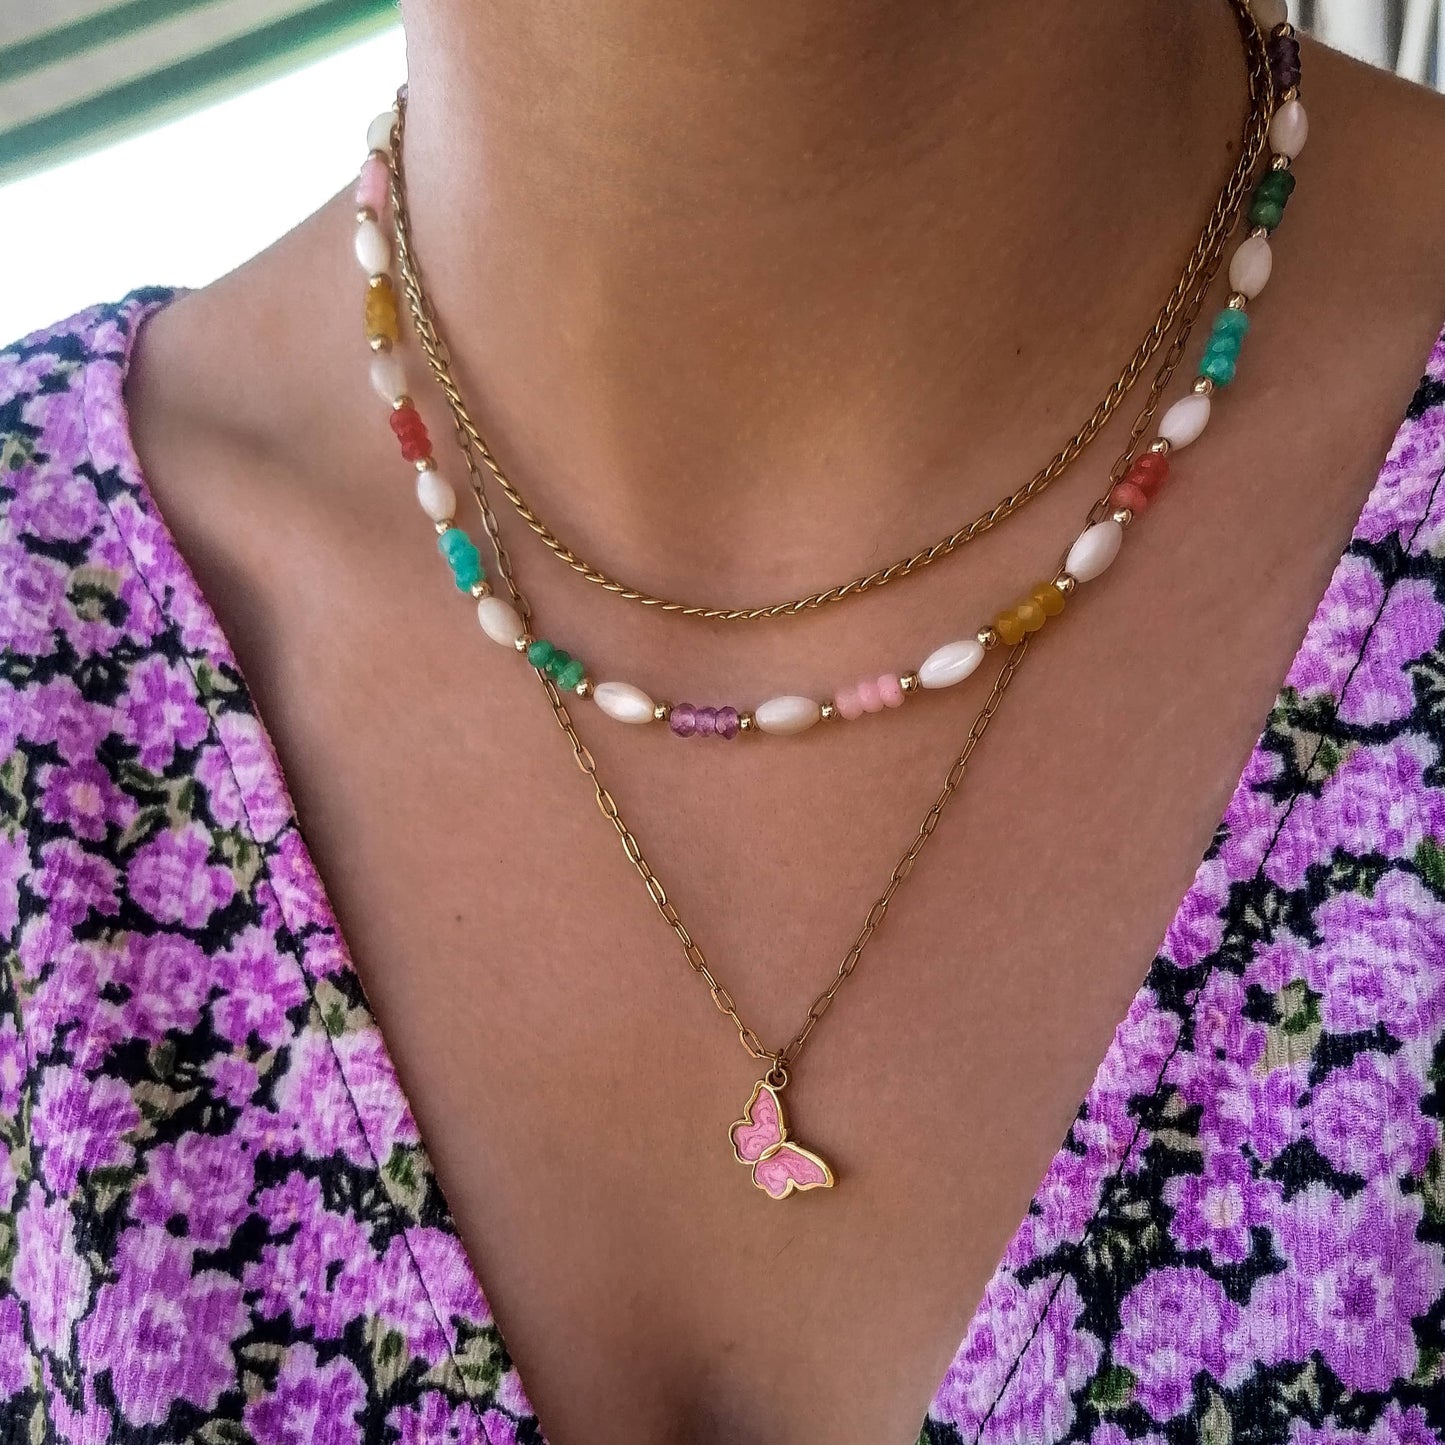 Dominica necklace